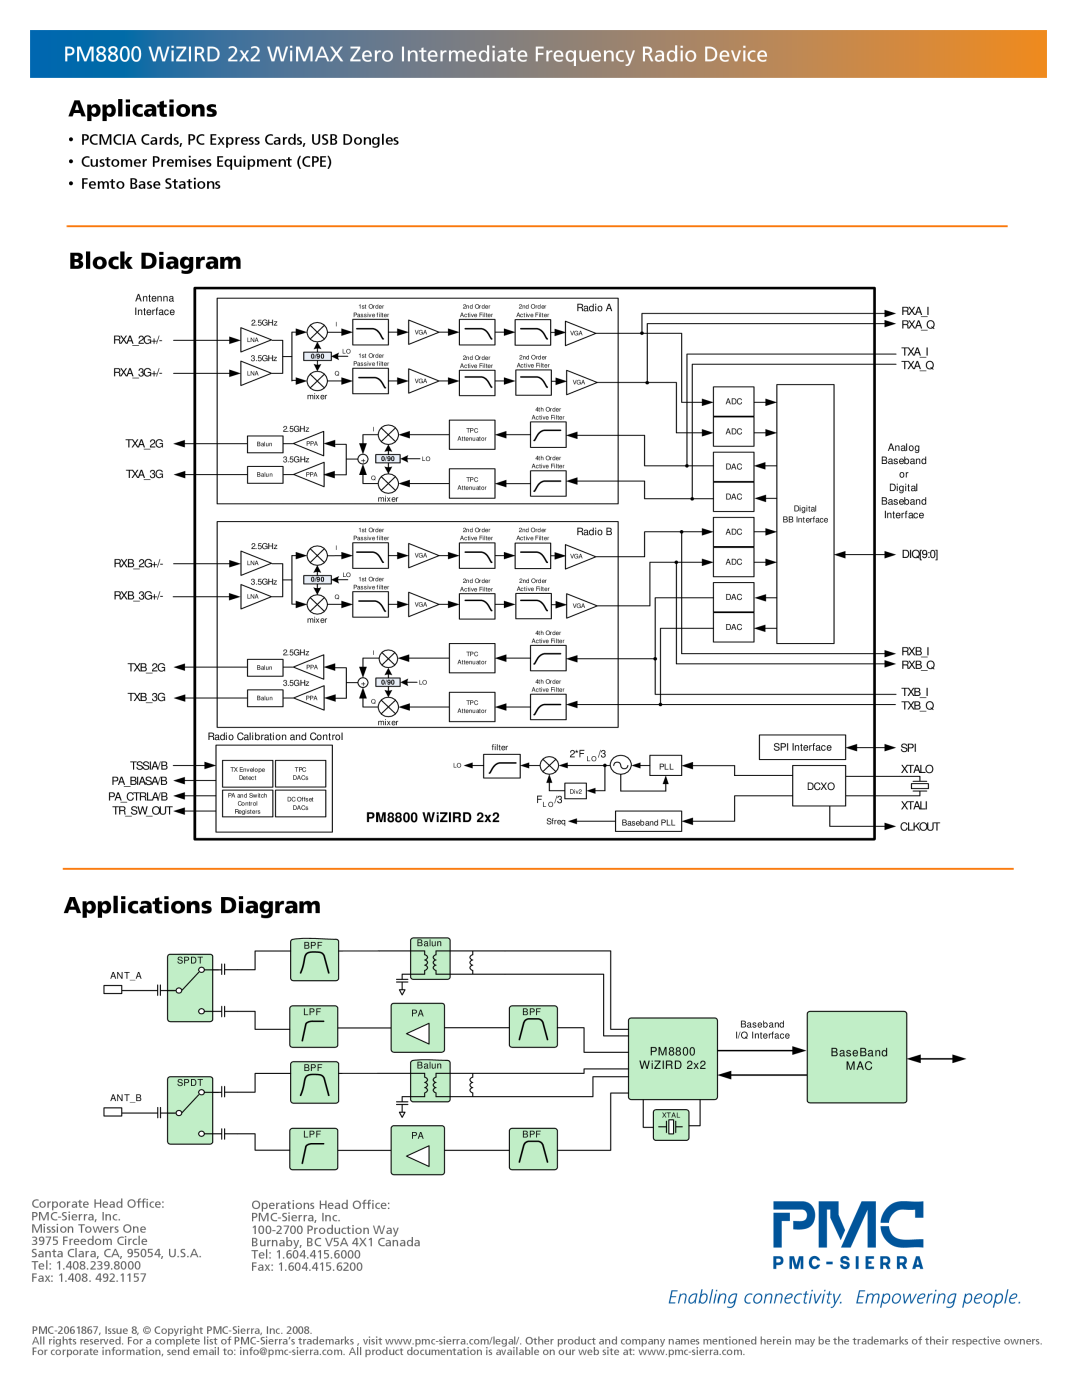 PMC-Sierra M8800 Block Diagram, Applications Diagram, PCMCIA Cards, PC Express Cards, USB Dongles, Femto Base Stations 